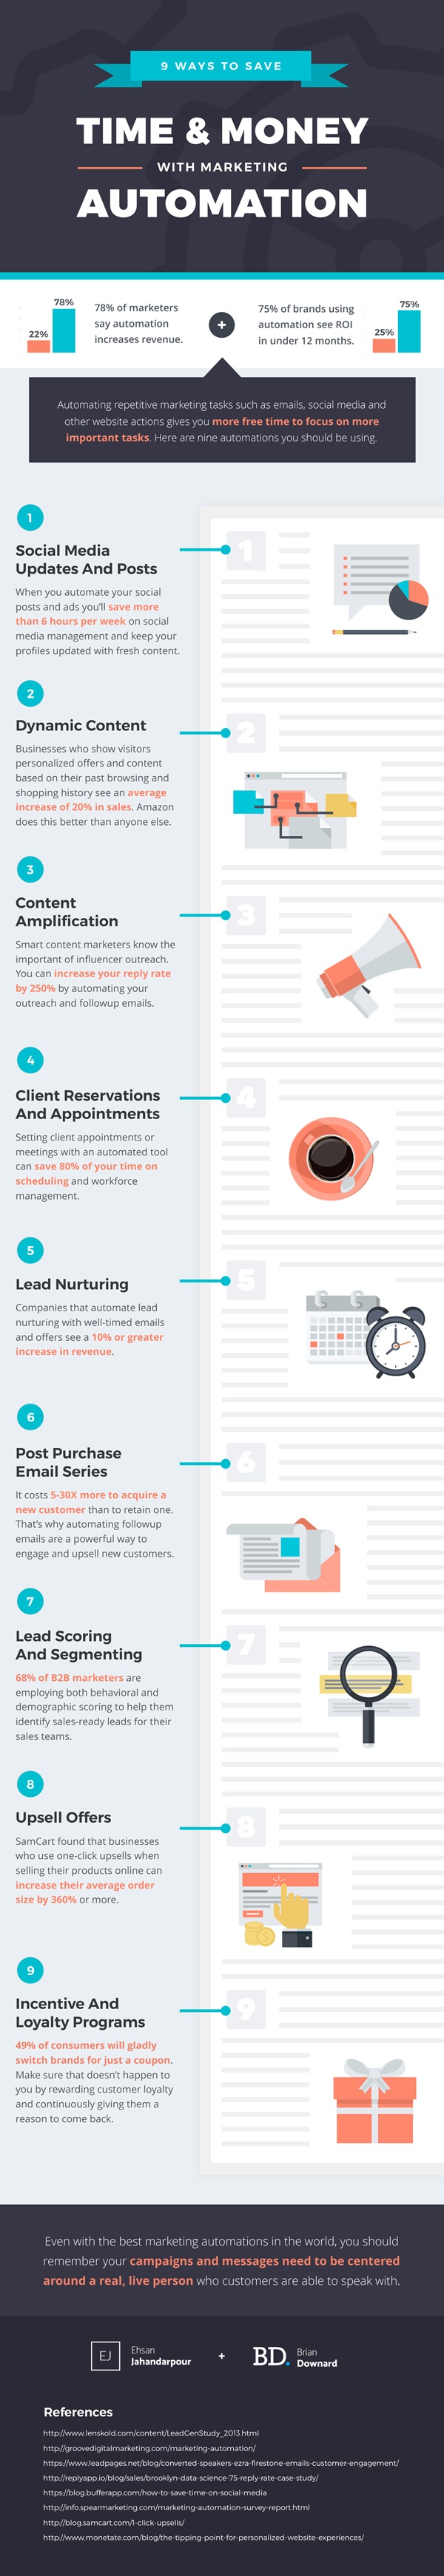 Infographic showing 9 ways to save time and money with marketing automation.